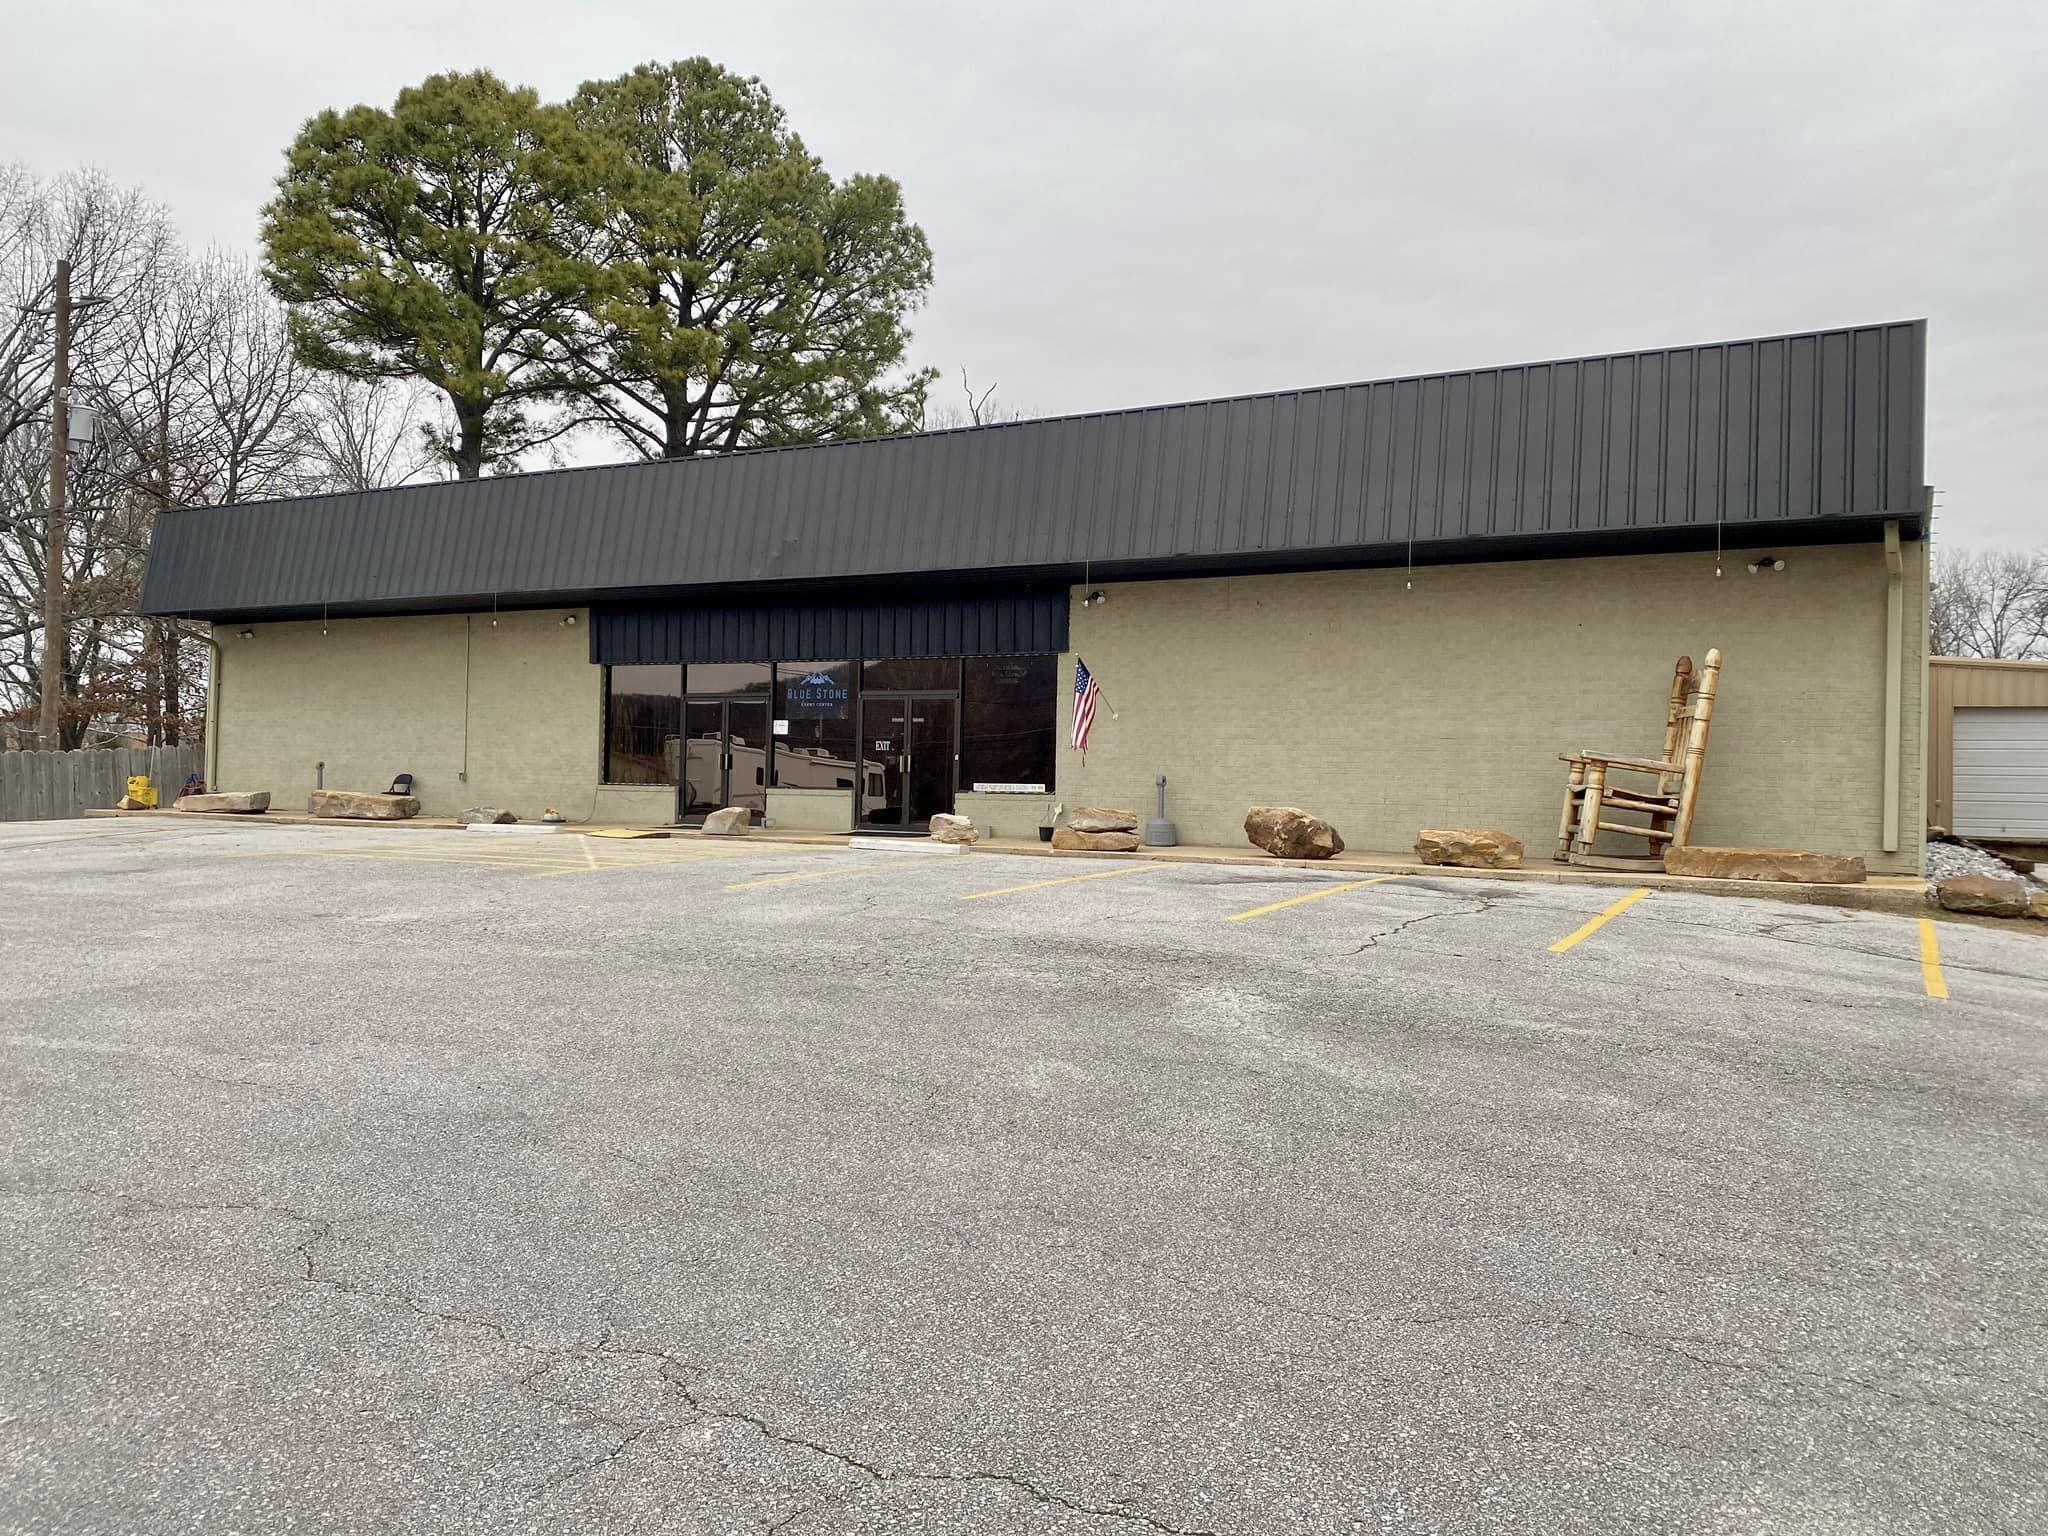 Commercial / Industrial for sale – 906 E Main Street   Mountain View, AR